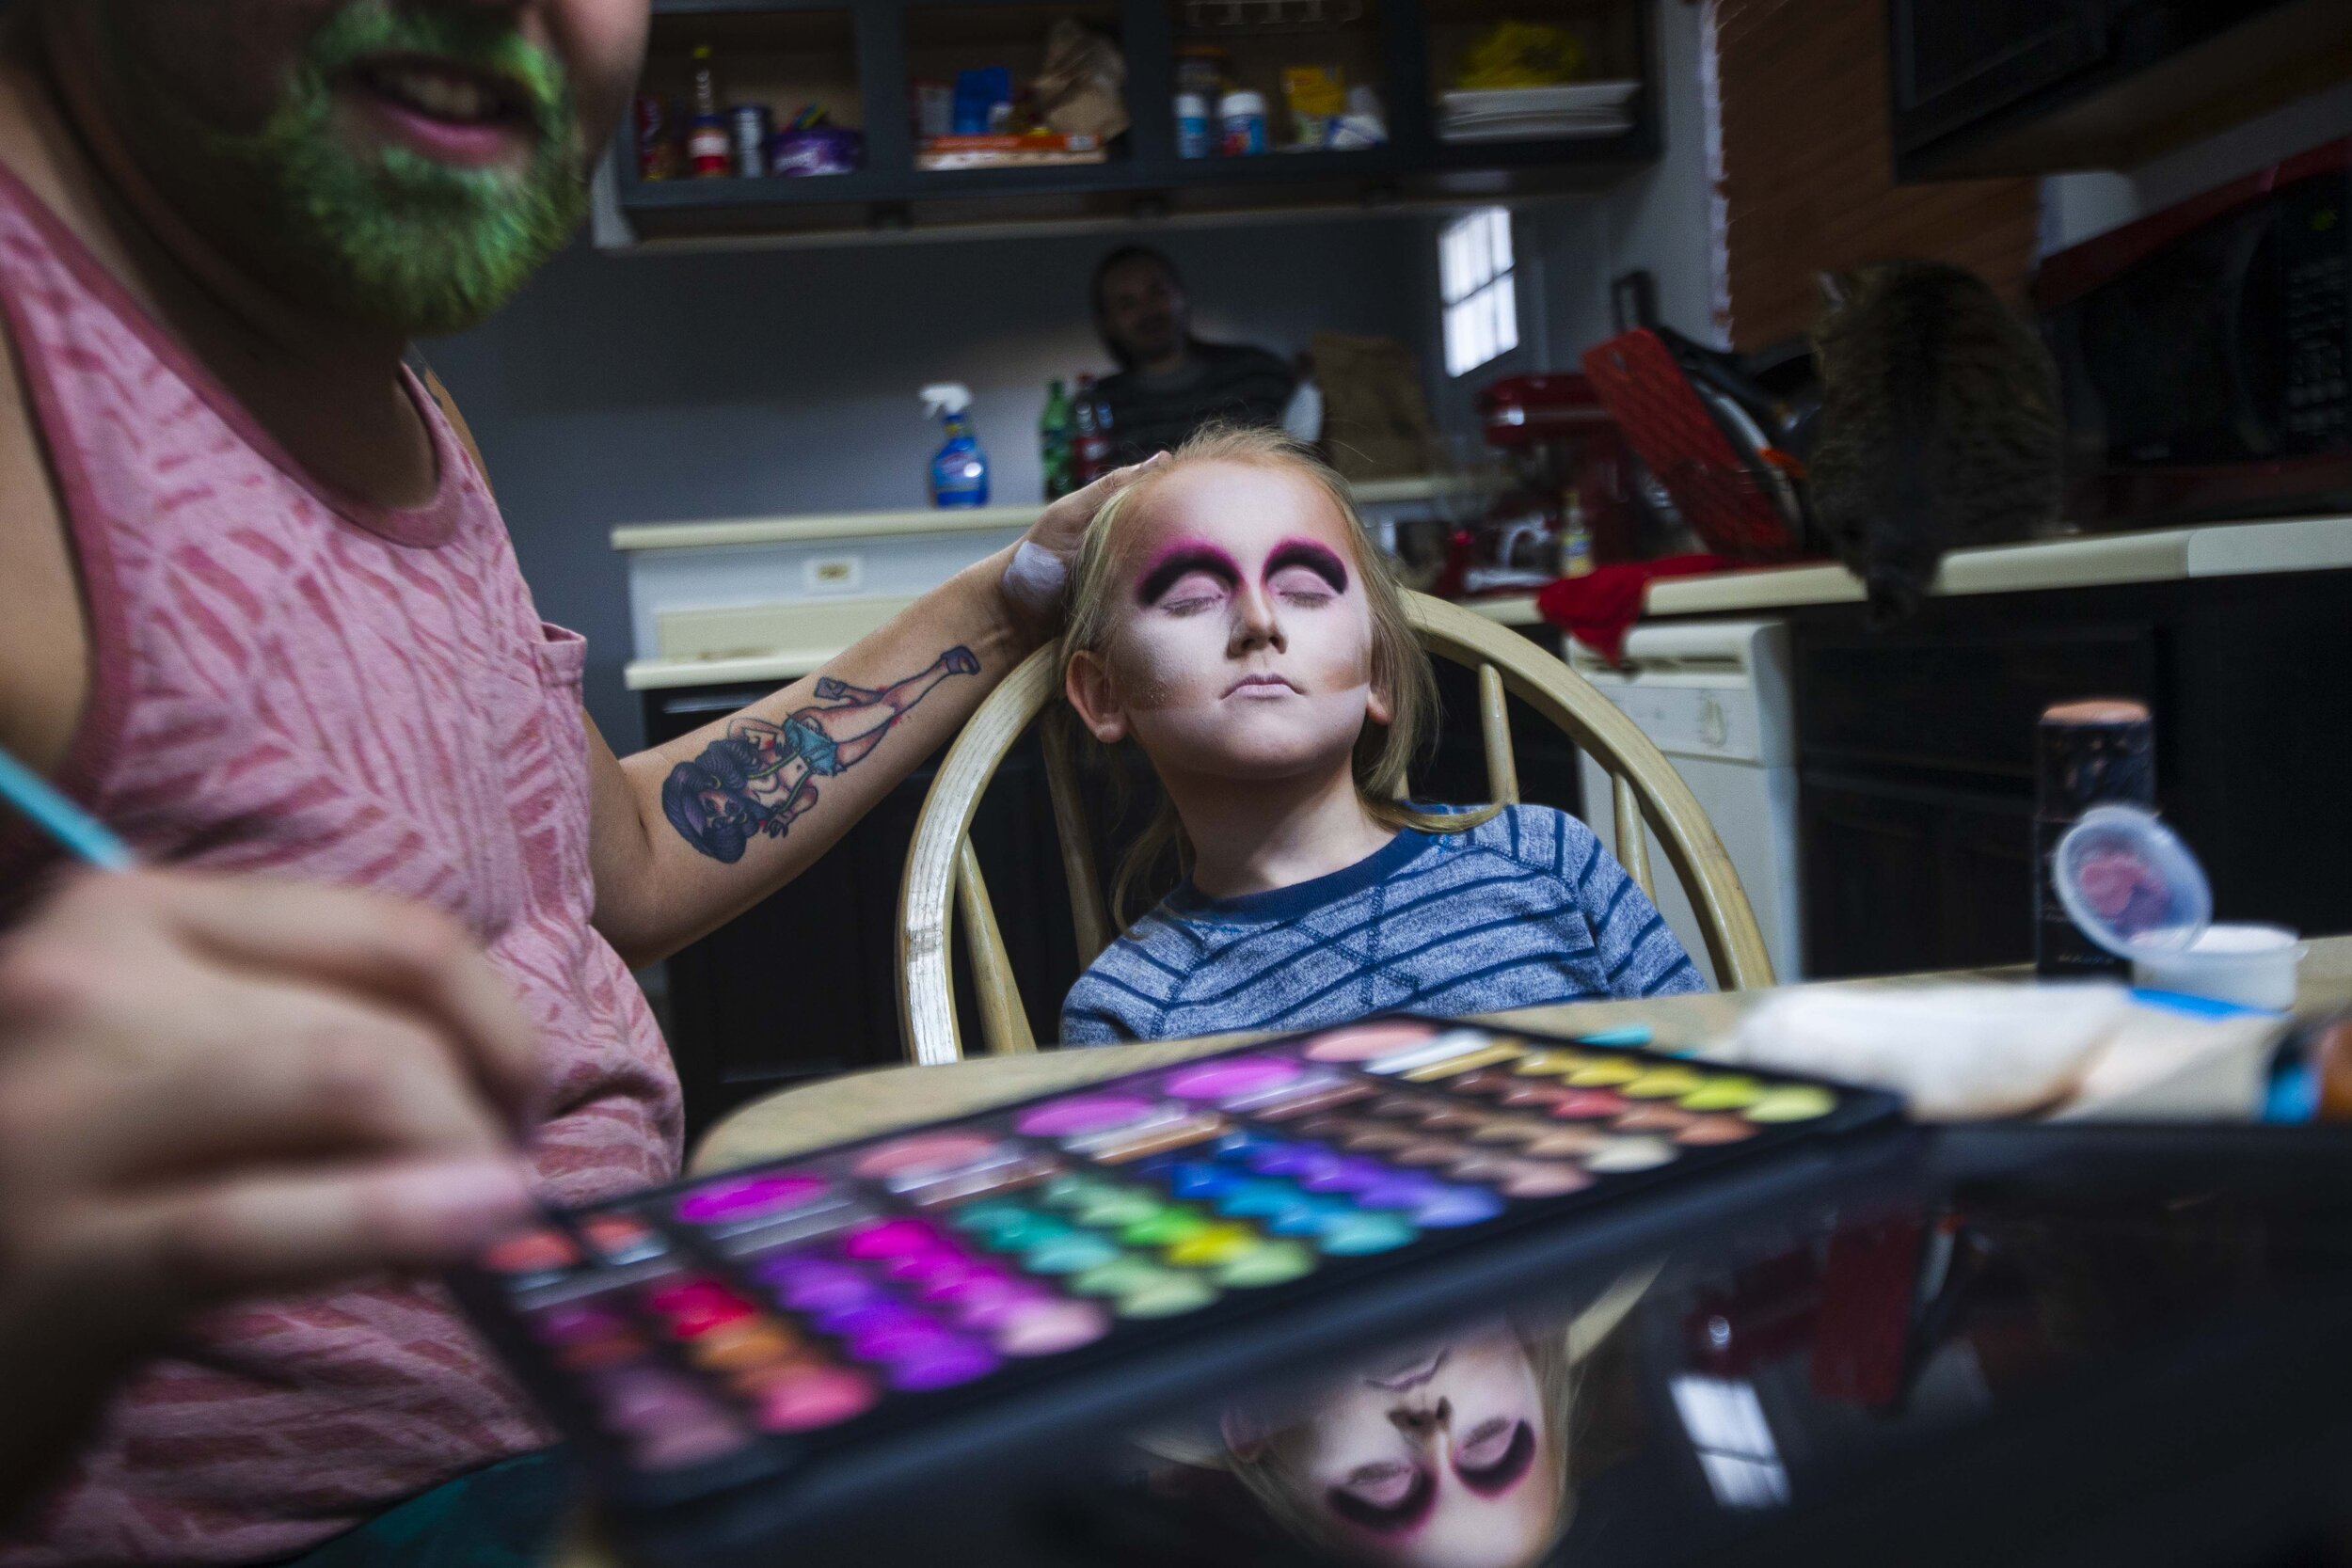  Robby, a drag queen, then 25, left, applies makeup, as his husband, Alex, then 26, at rear, looks on during a drag lesson for Keegan, a gender creative child, then 8, right, at their home in Austin, Texas, U.S., Nov. 15, 2018.    As the years have p